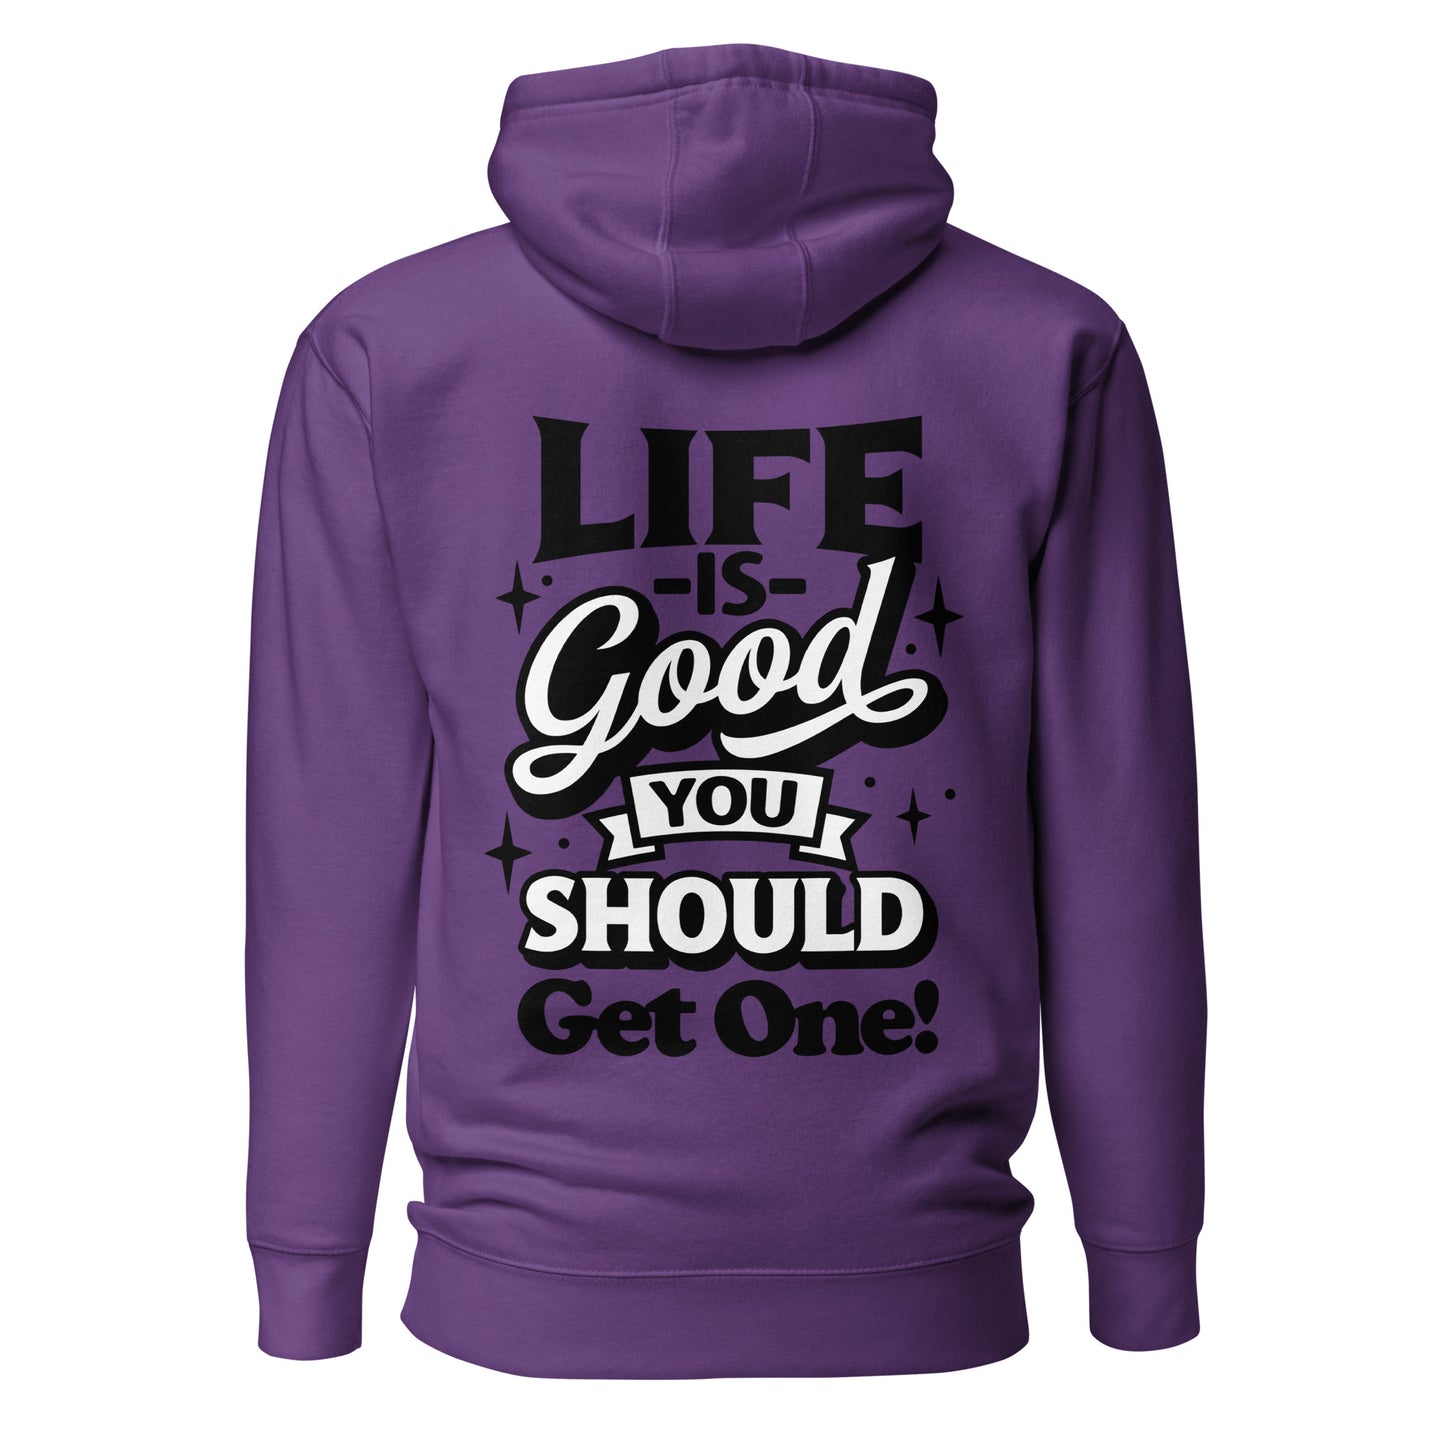 Life is Good, You Should Get One Funny Cotton Heritage Adult Hoodie